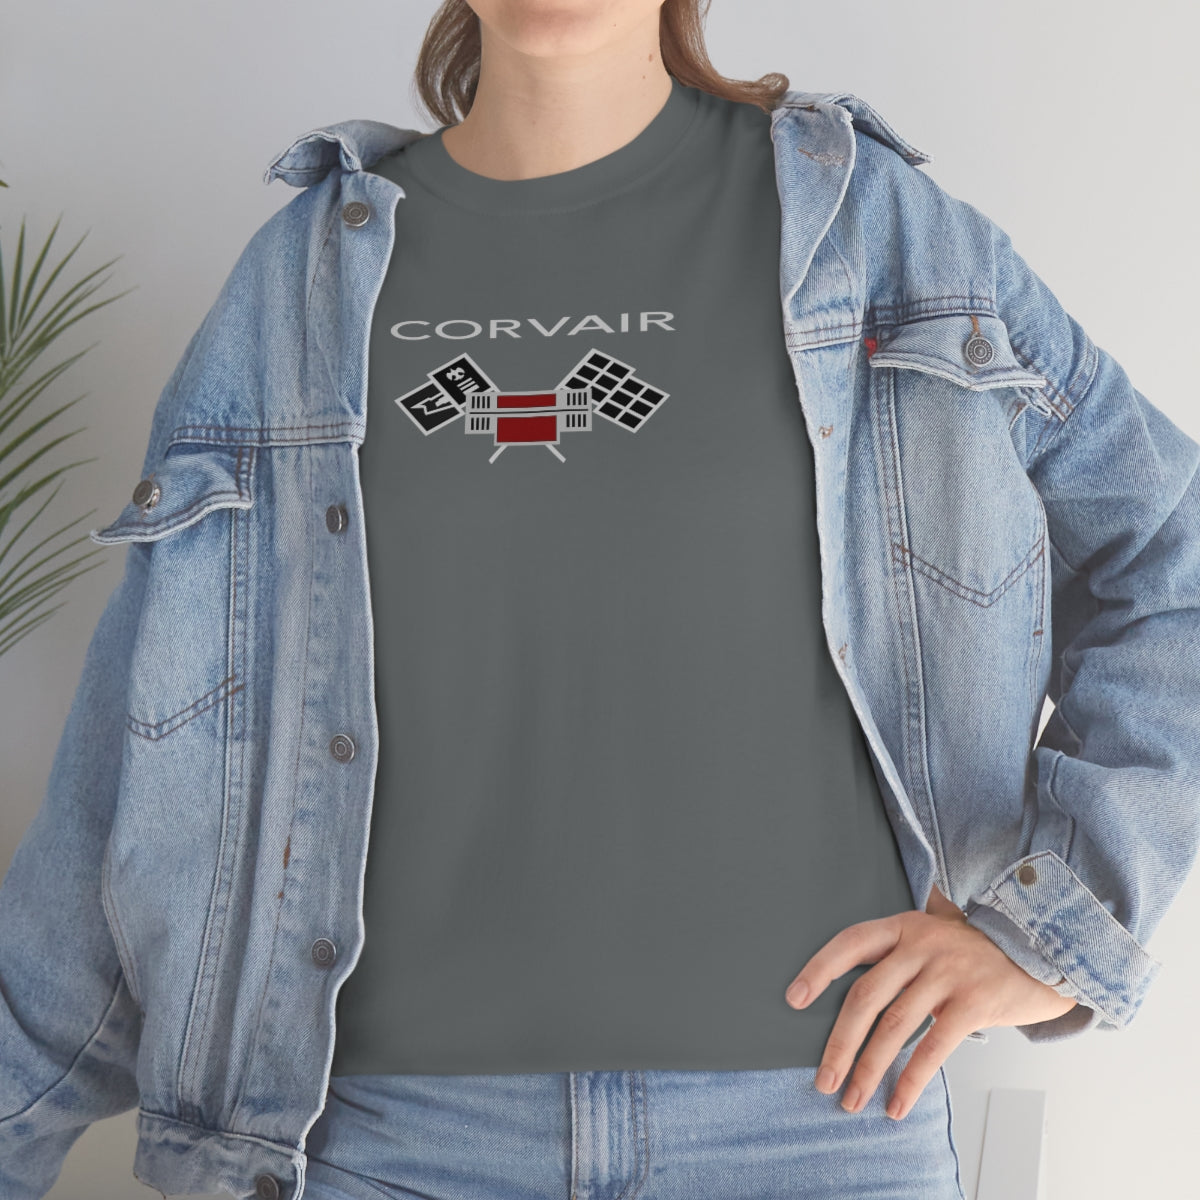 Corvair Heavy Cotton Tee Chevy